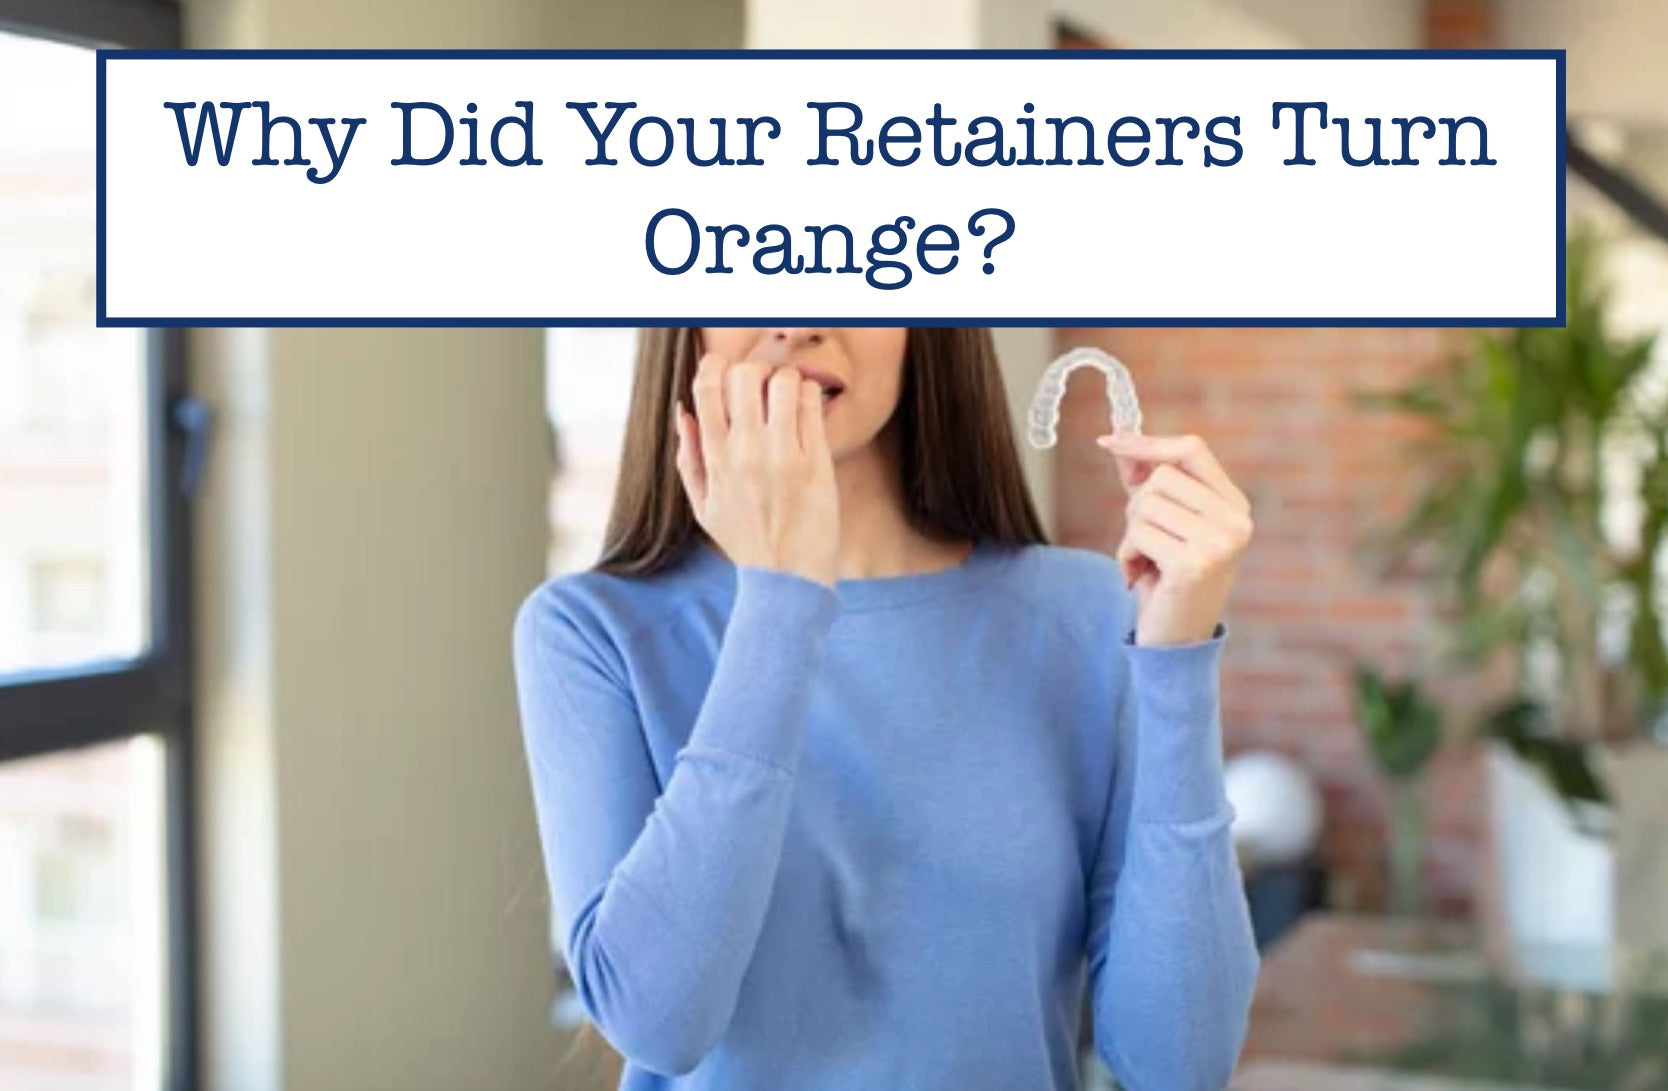 Why Did Your Retainers Turn Orange?